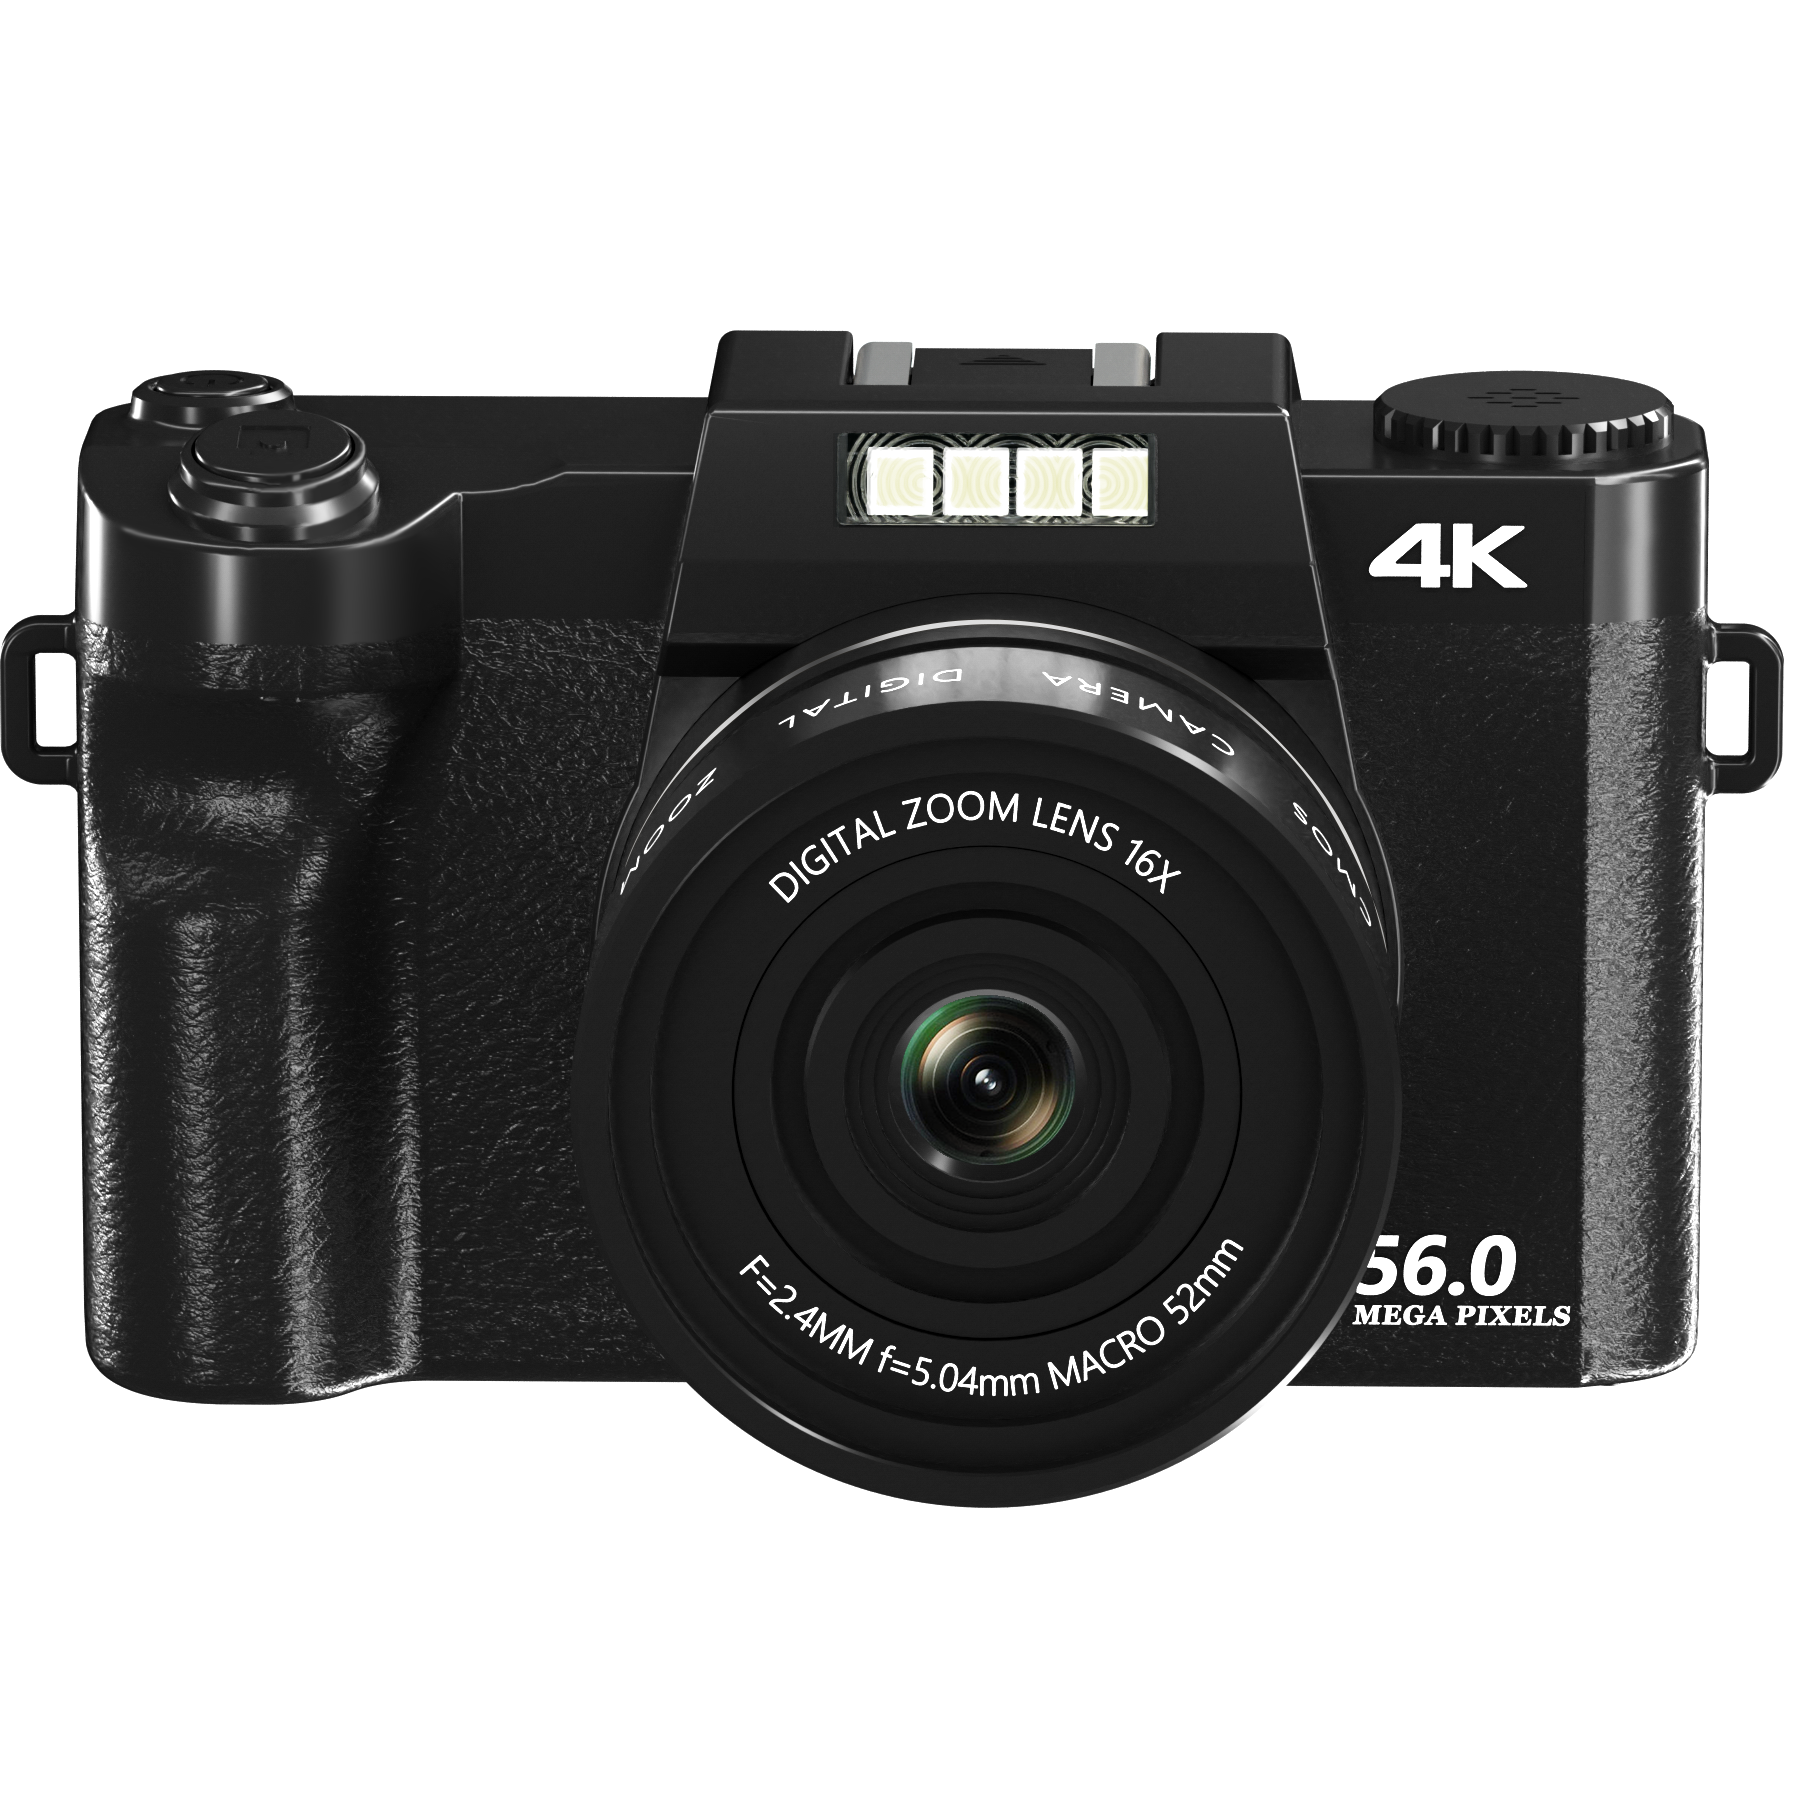 Capture the World in Stunning Detail with the AC-W03 Digital Camera